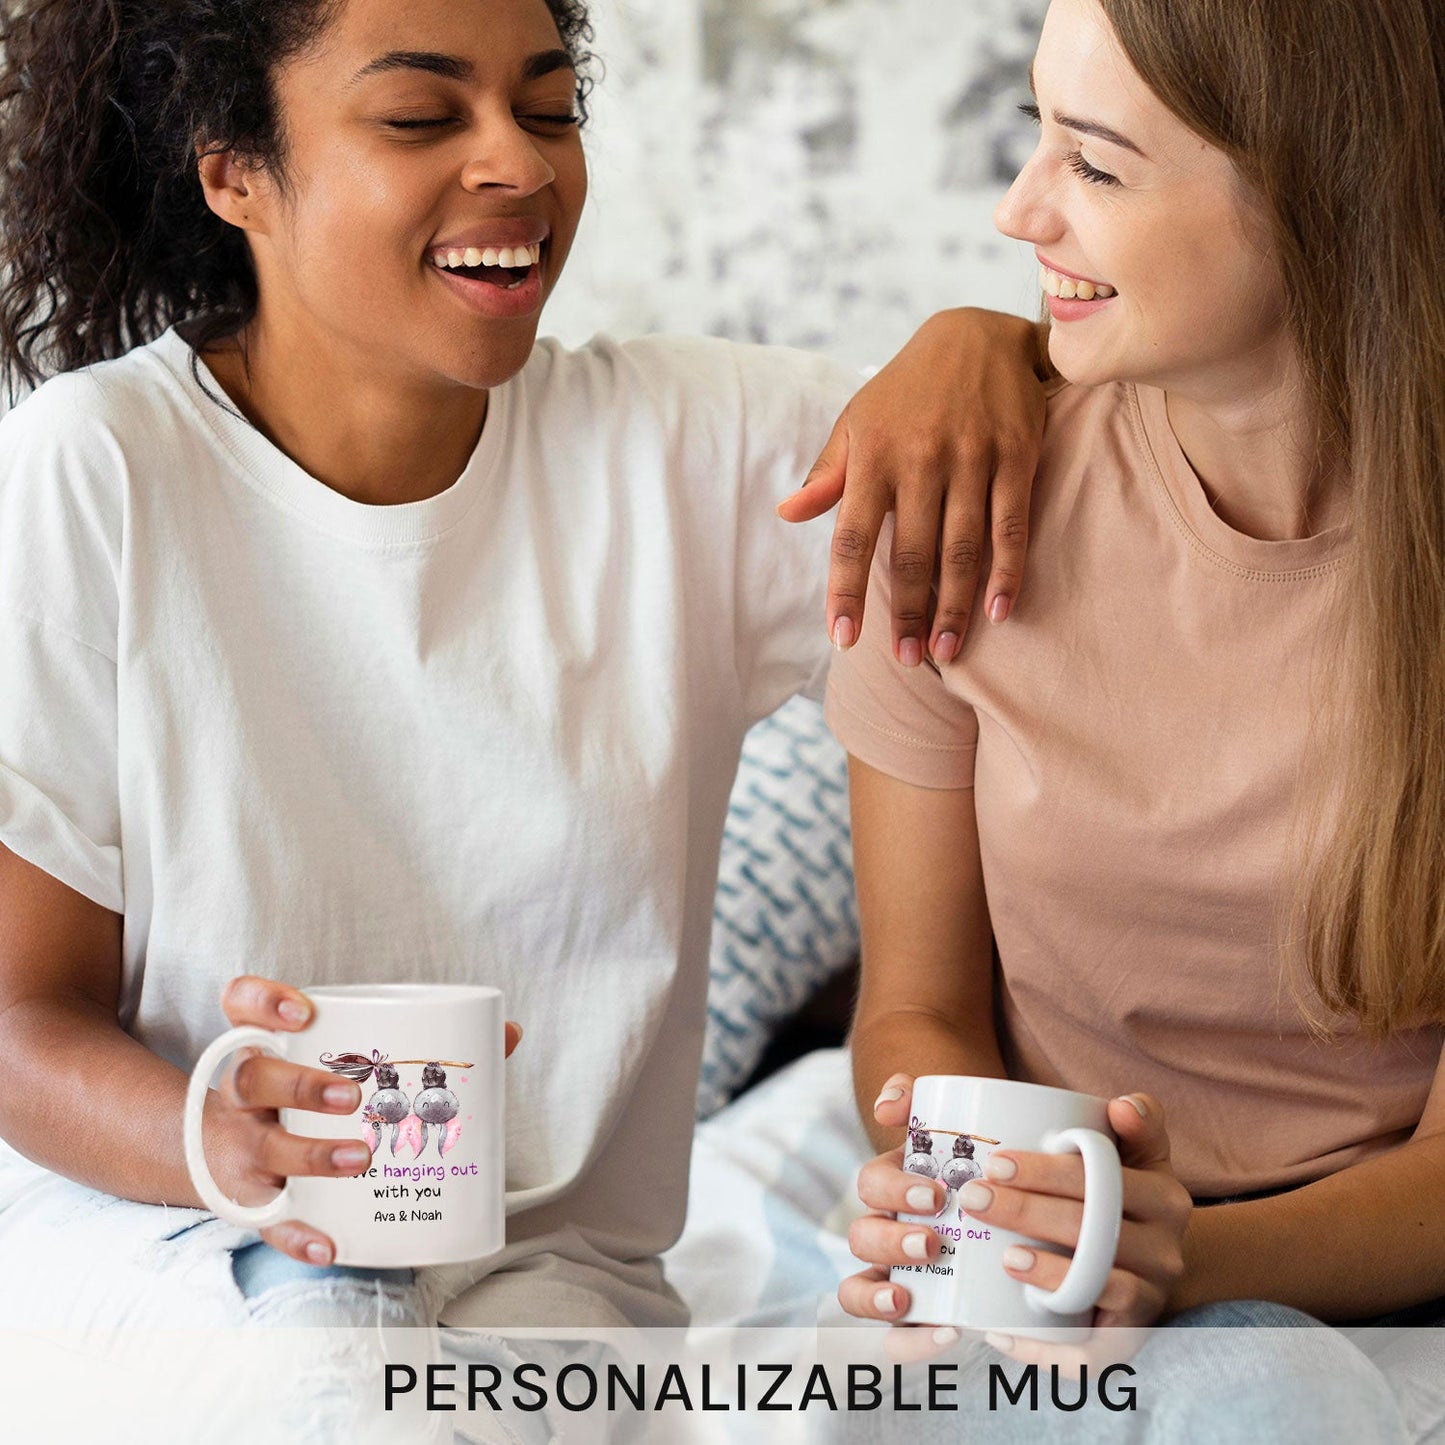 I Love Hanging Out With You - Personalized Anniversary or Halloween gift for Boyfriend or Girlfriend - Custom Mug - MyMindfulGifts